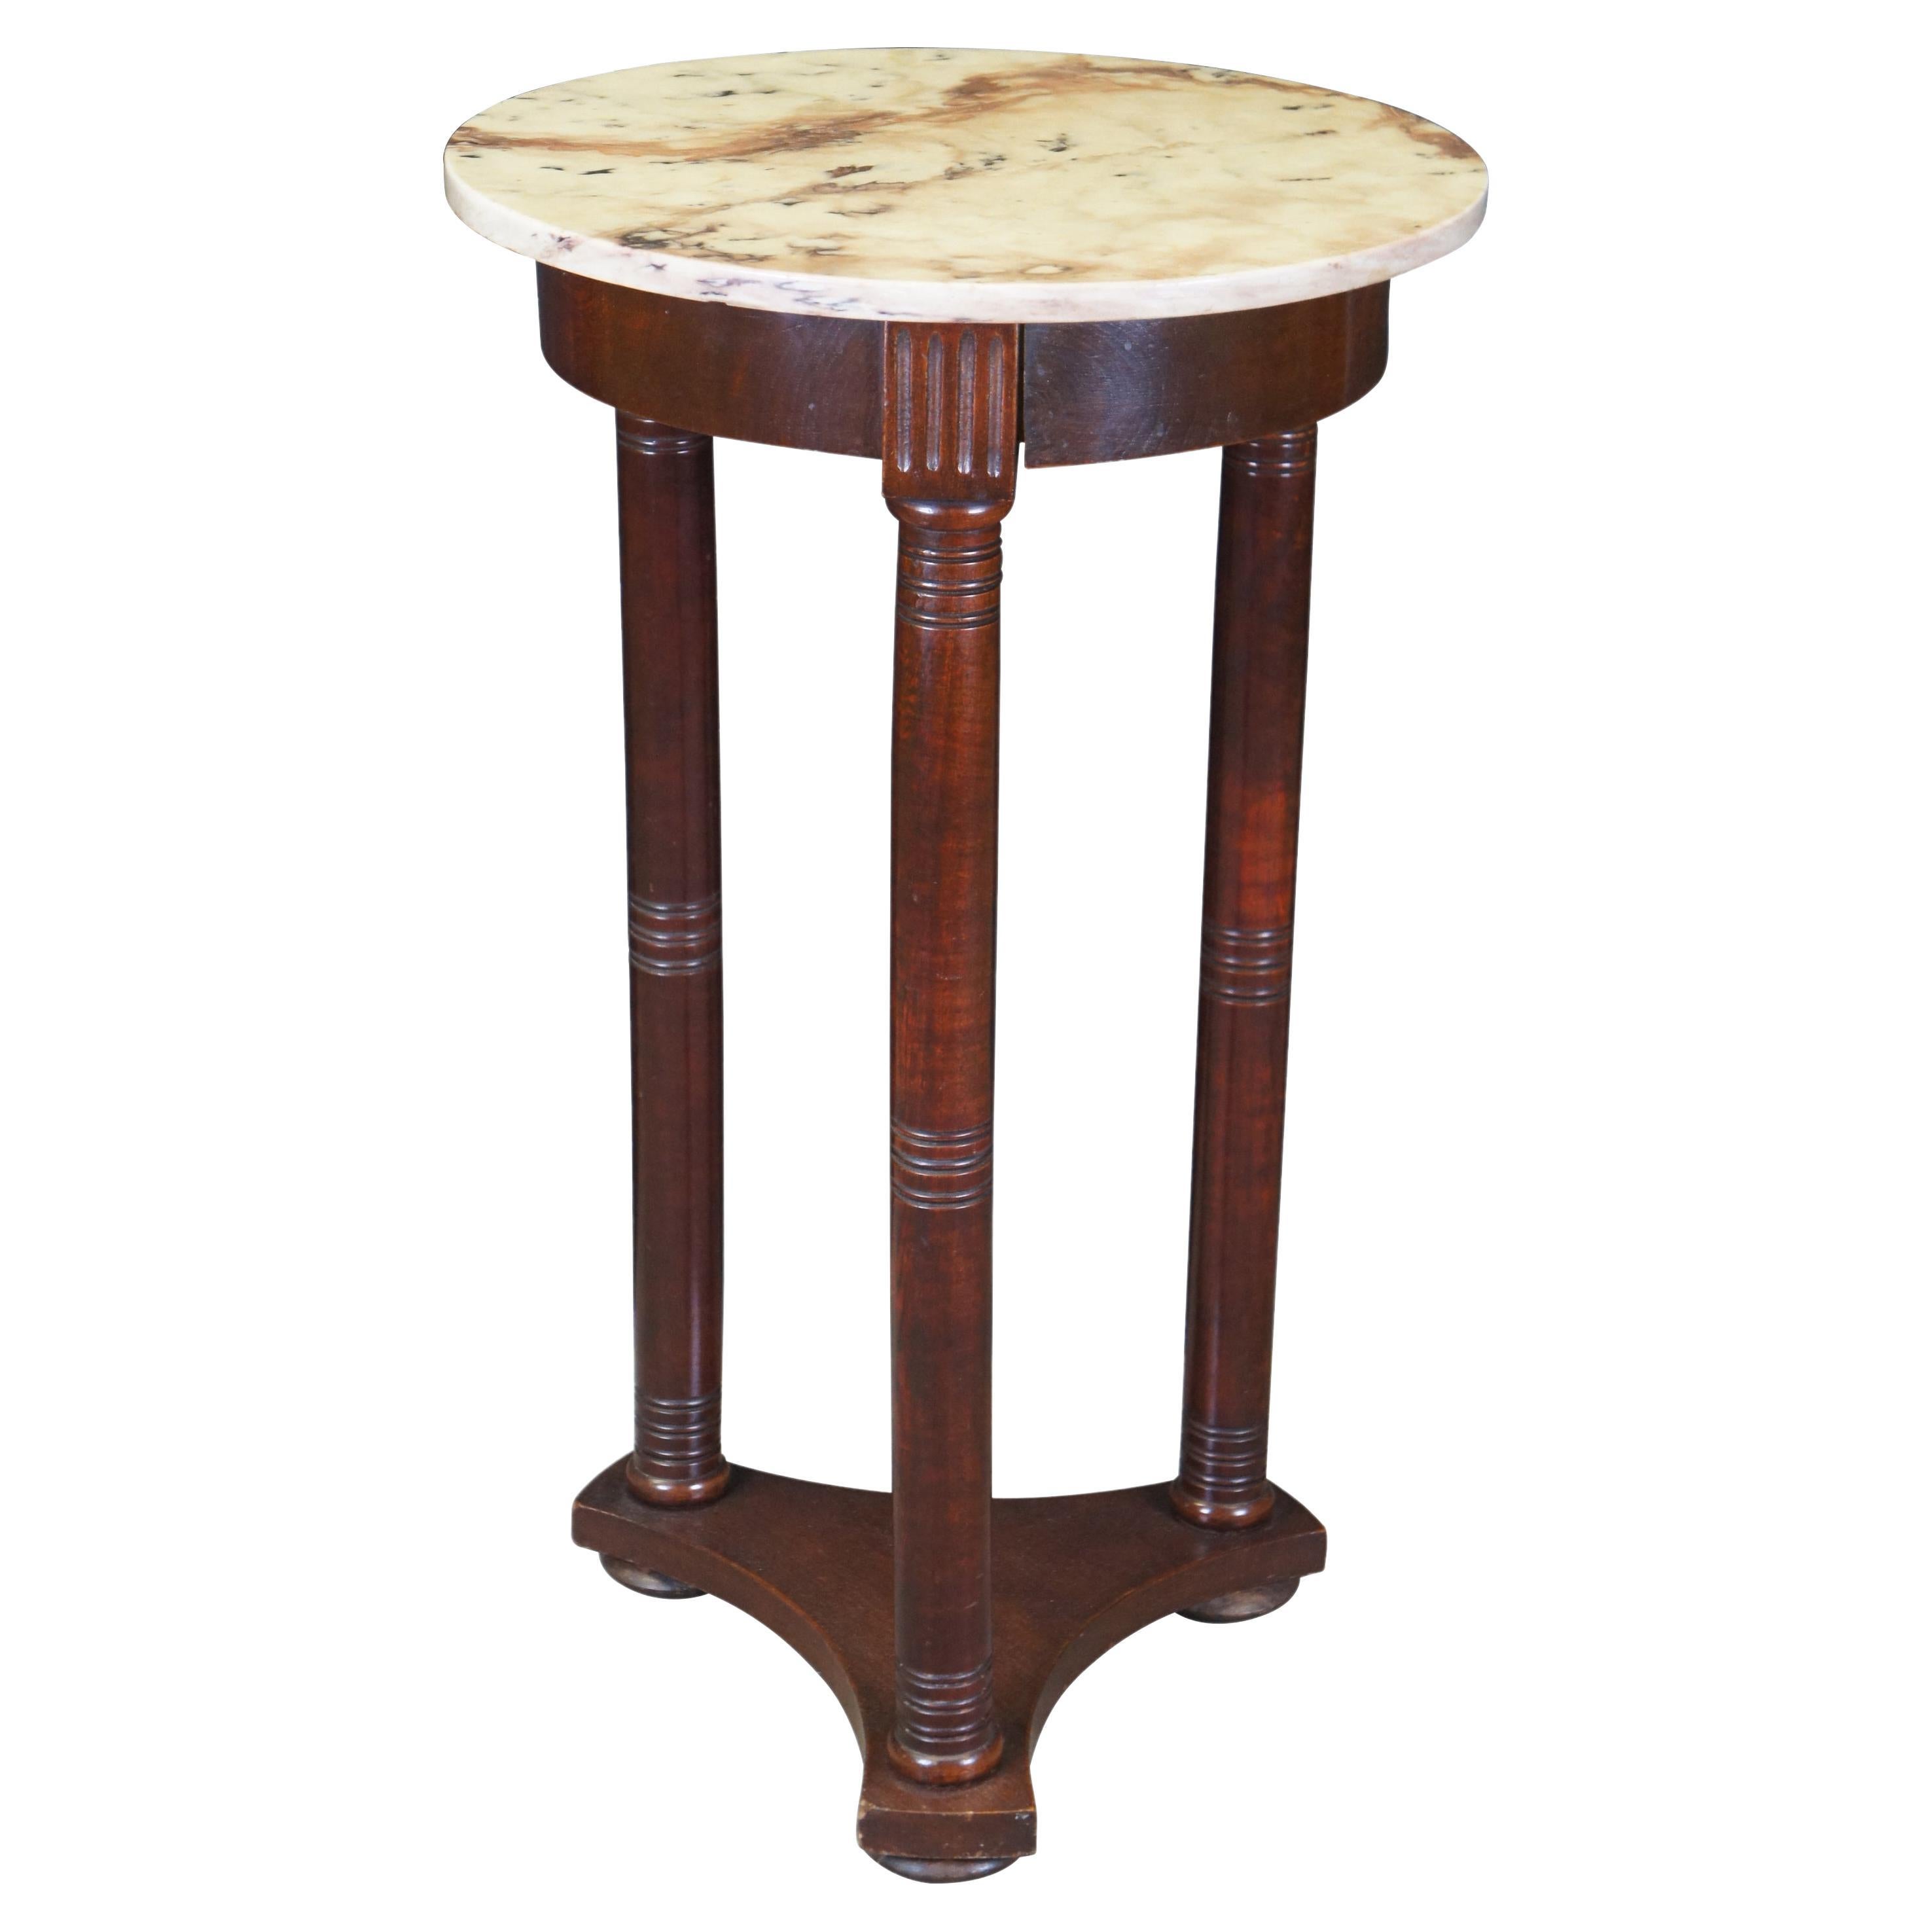 English Regency Style Round Marble Mahogany Pedestal Table Plant Stand 29"